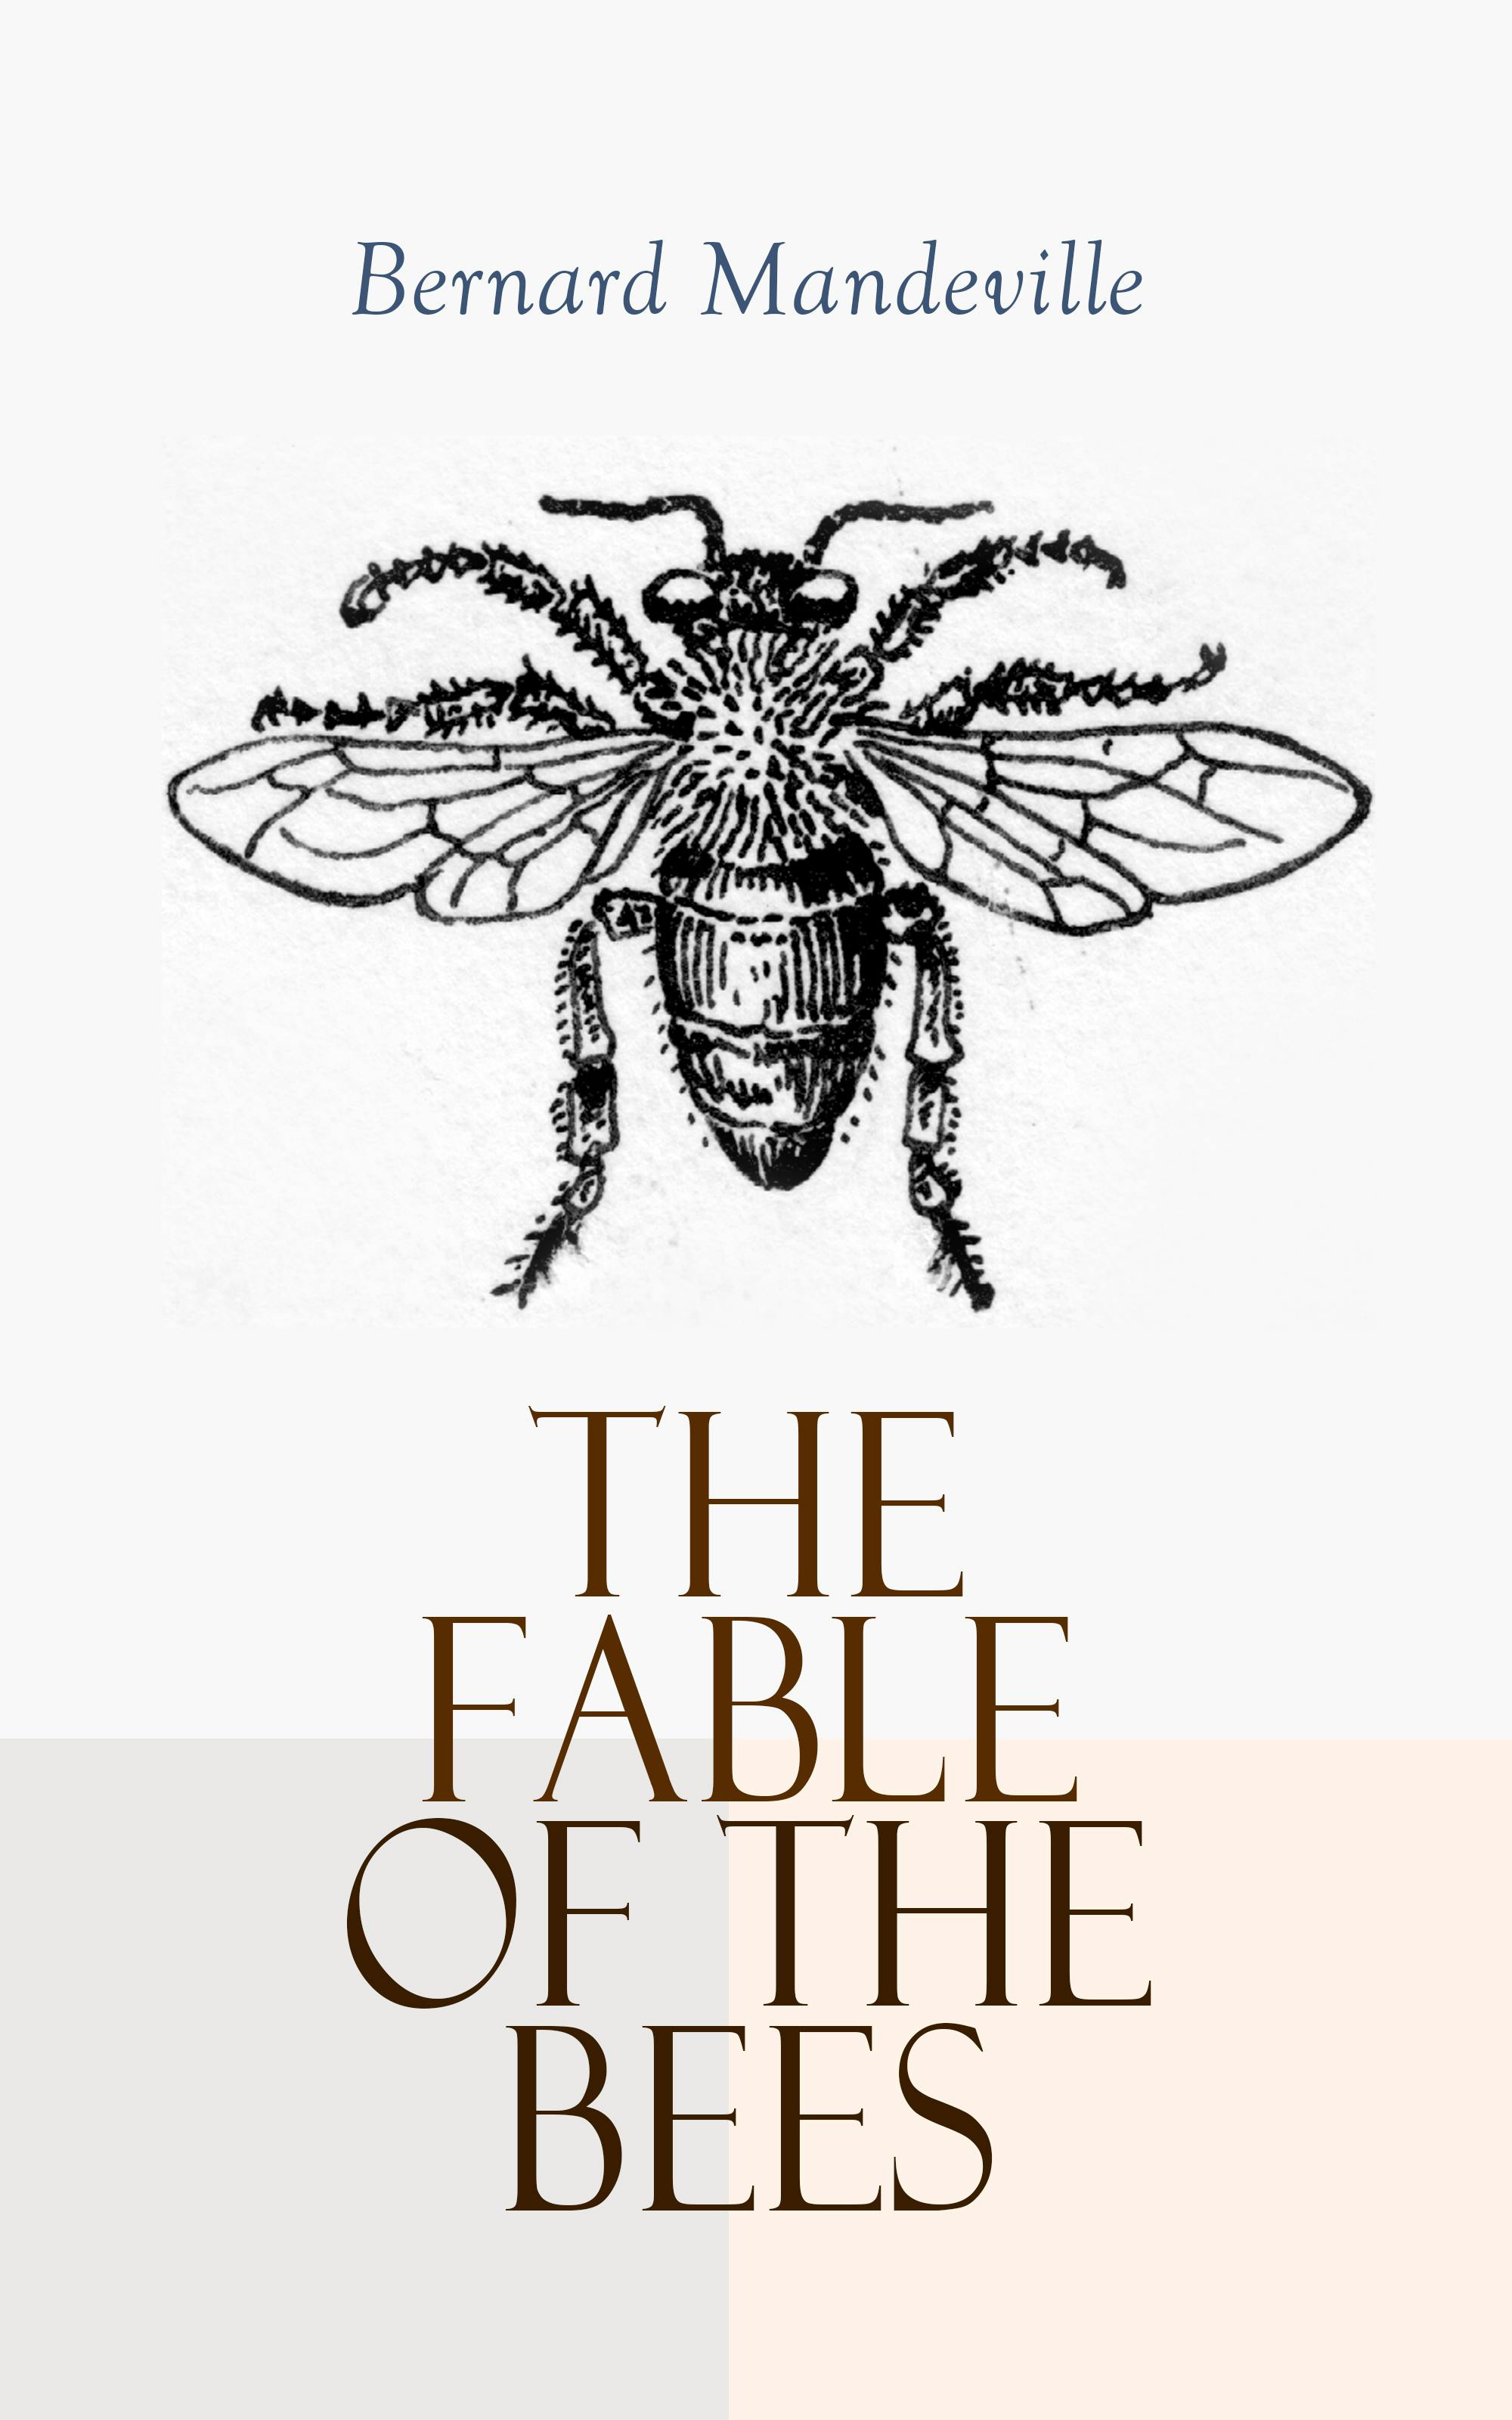 The Fable of the Bees: Philosophical Classic - Bernard Mandeville